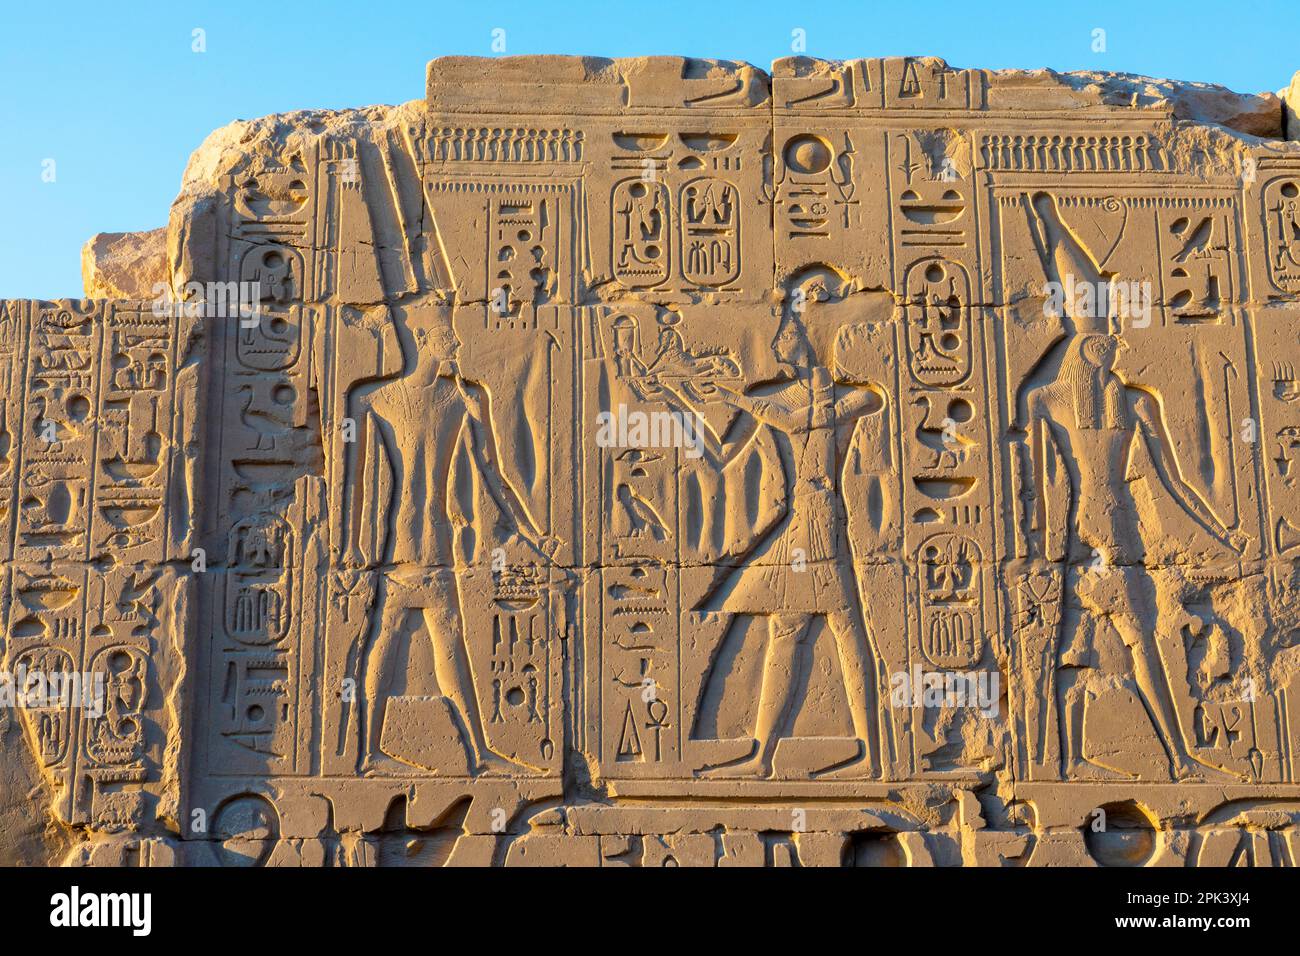 Stone Carvings and Hieroglyphs at Karnak Temple, Luxor, Egypt, North East Africa Stock Photo